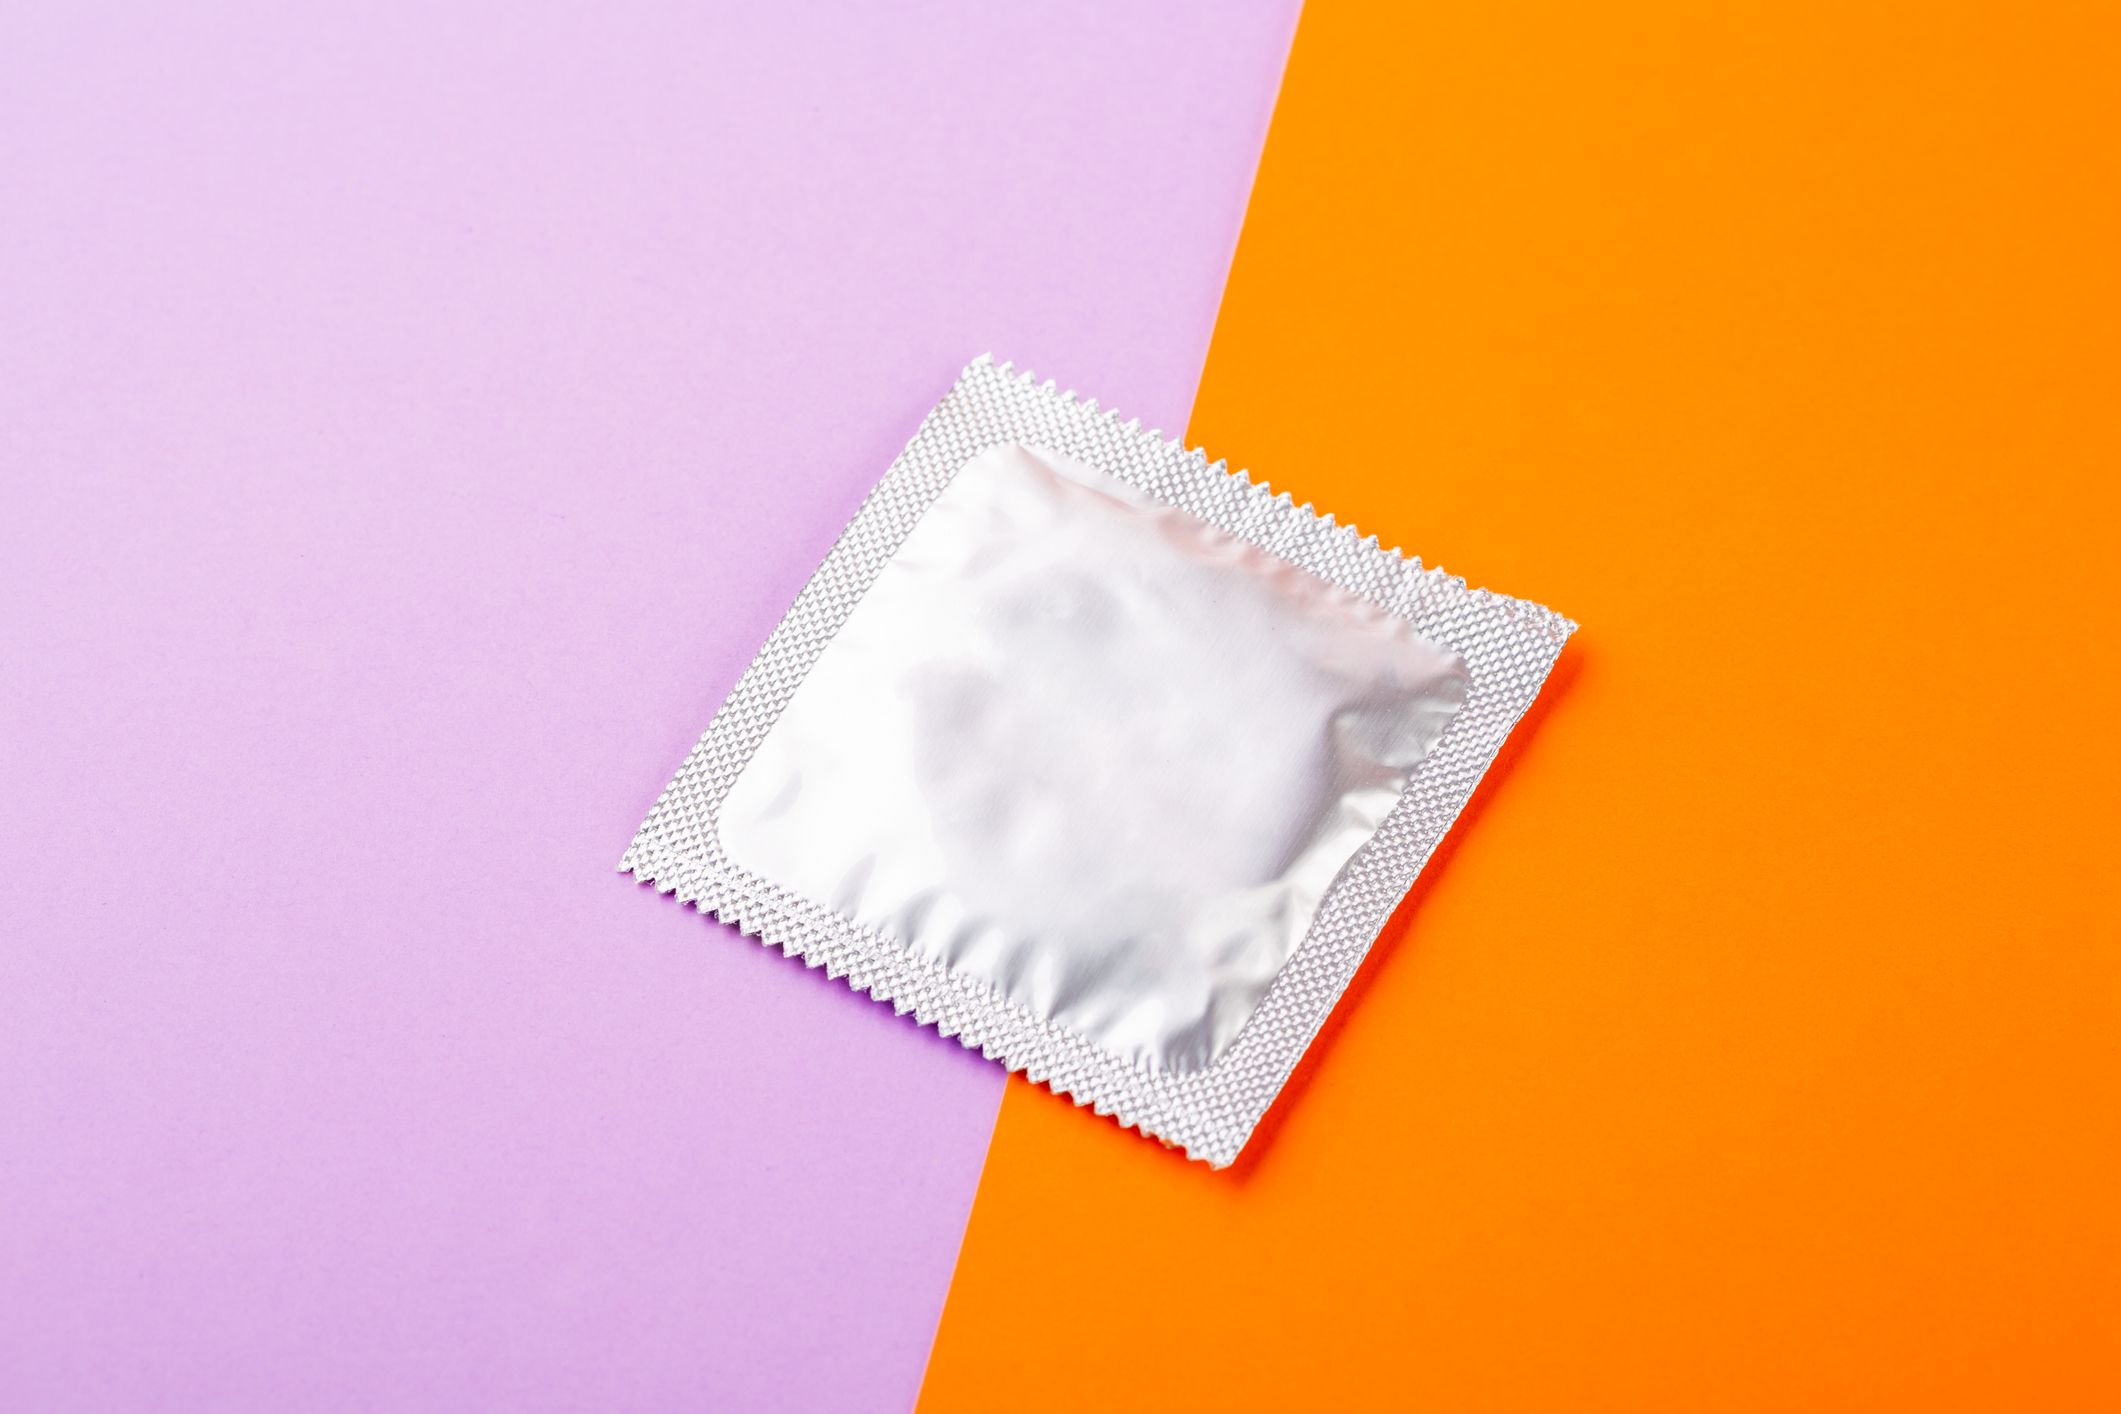 The FDA Authorized a Condom Designed Specifically for Anal photo